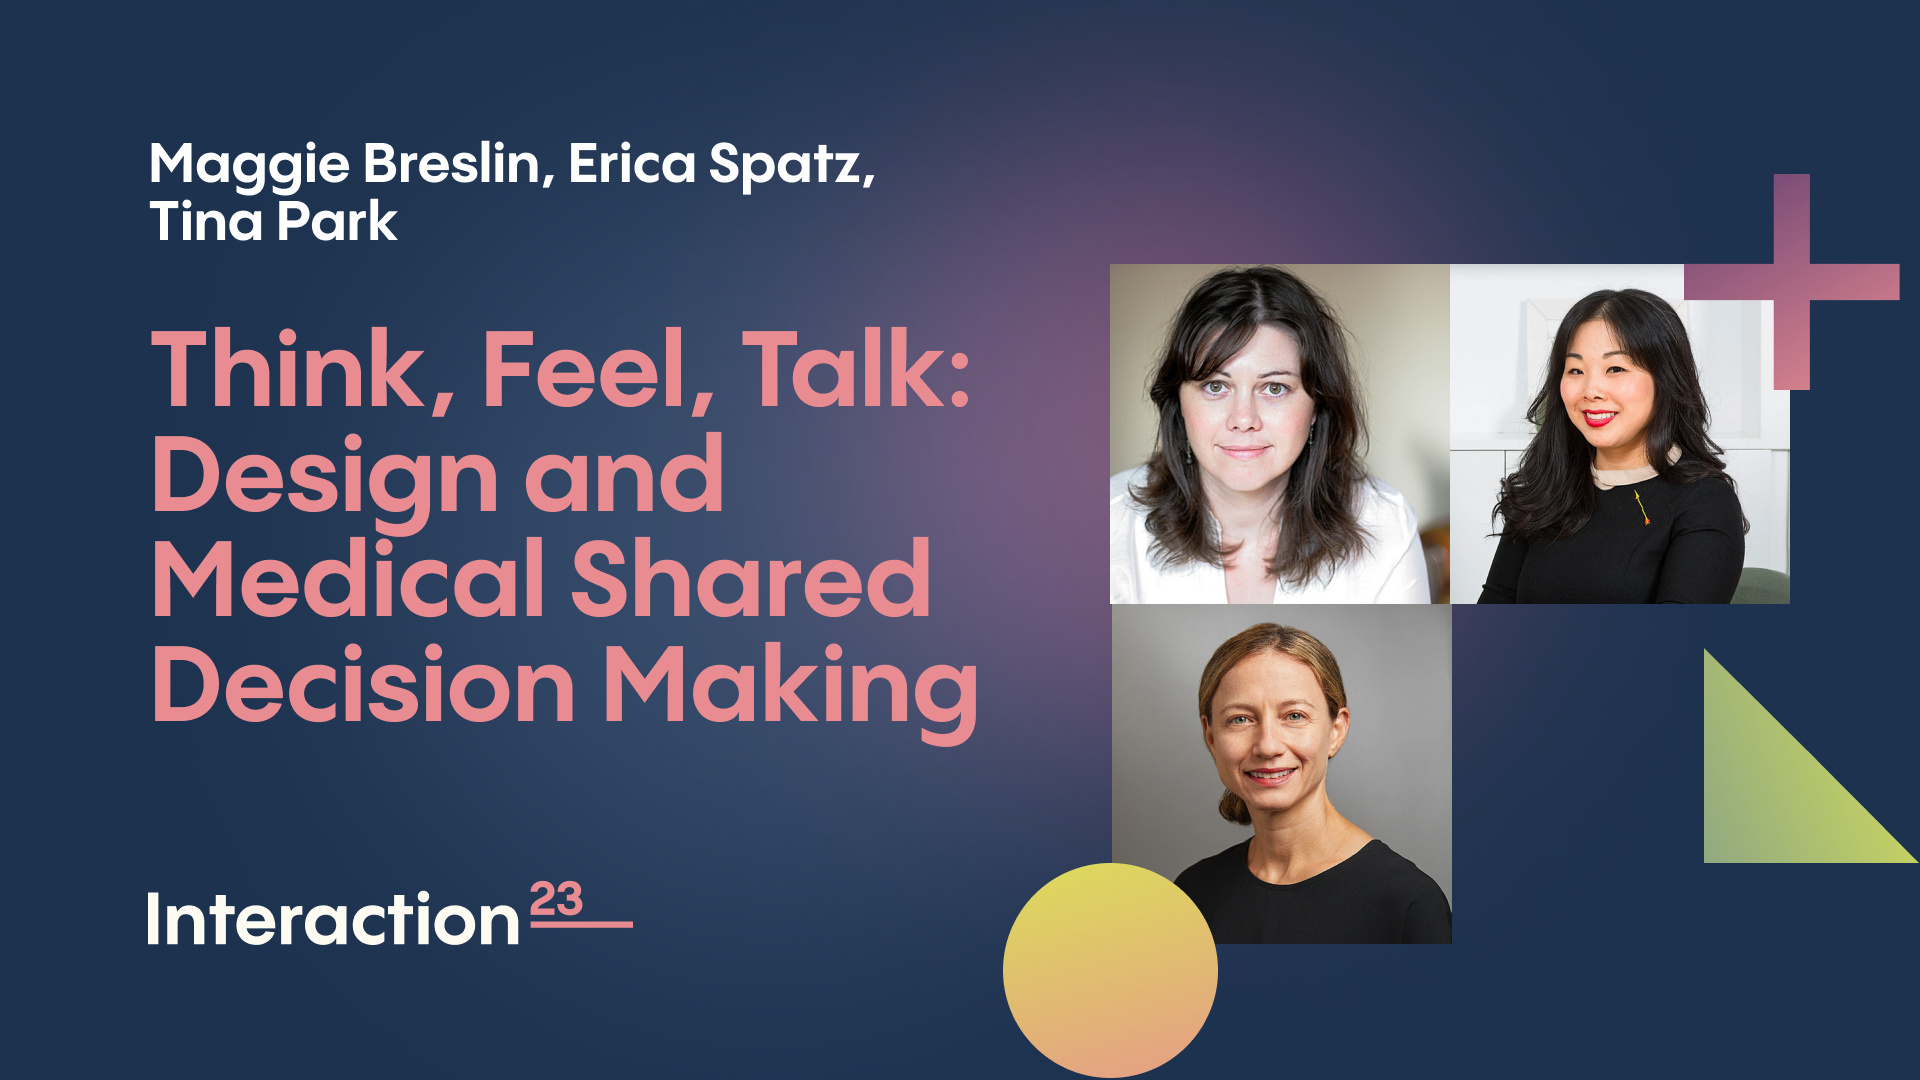 Think, Feel, Talk: Design and Medical Shared Decision Making